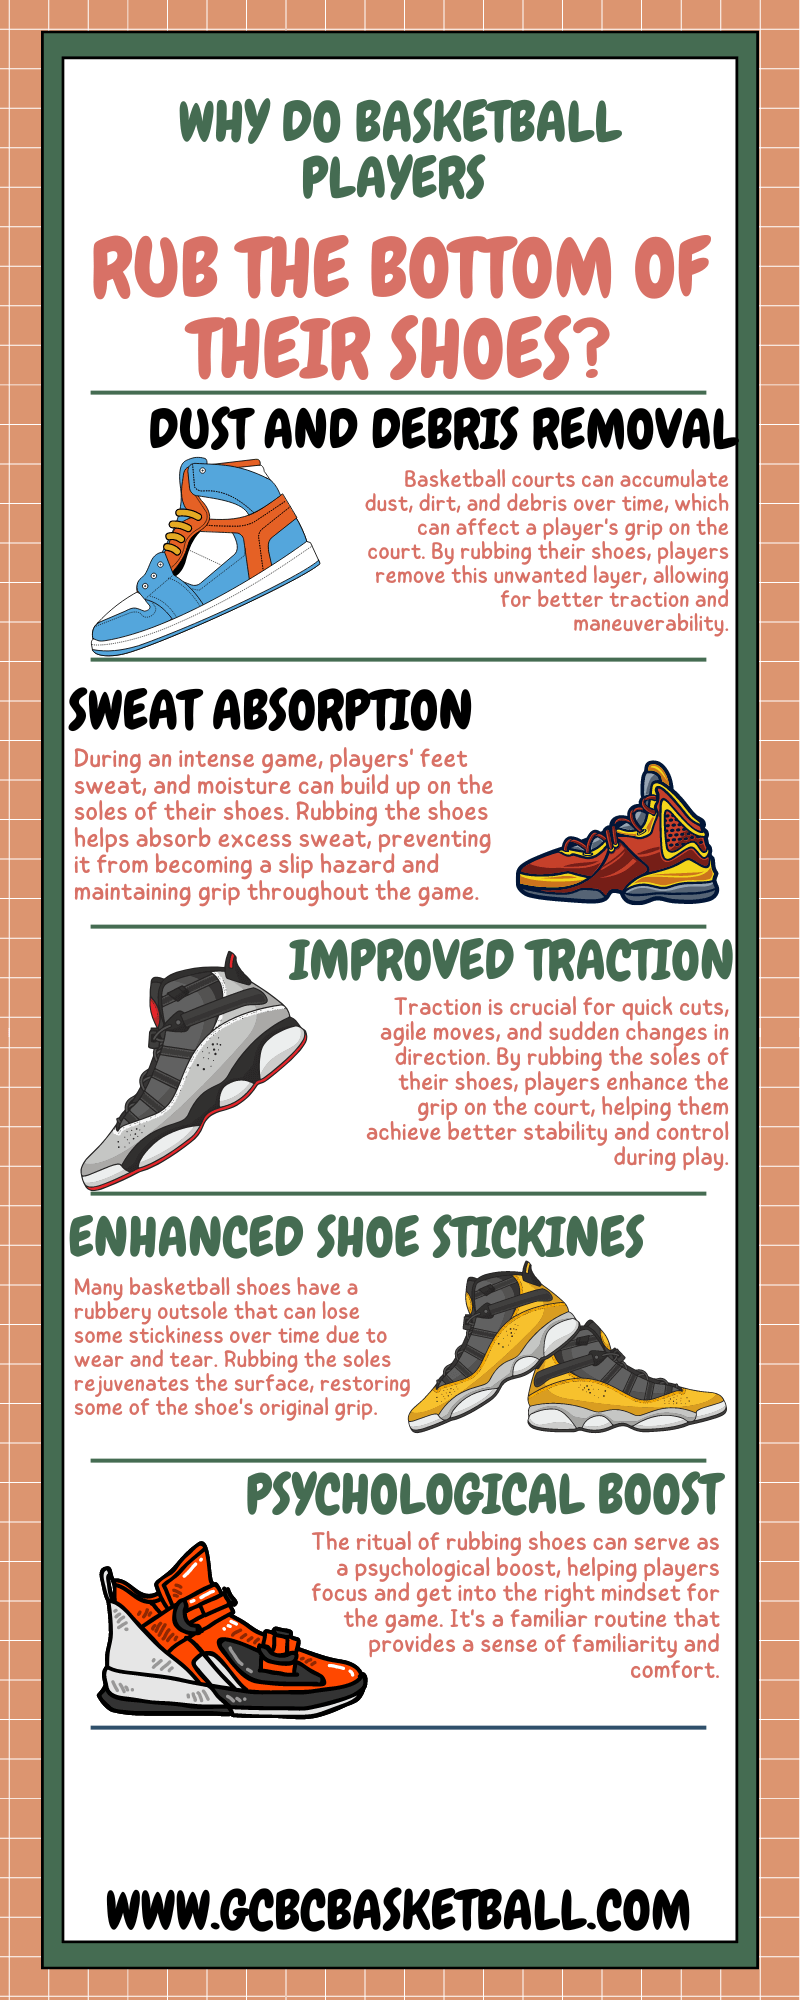 Importance of wiping shoes